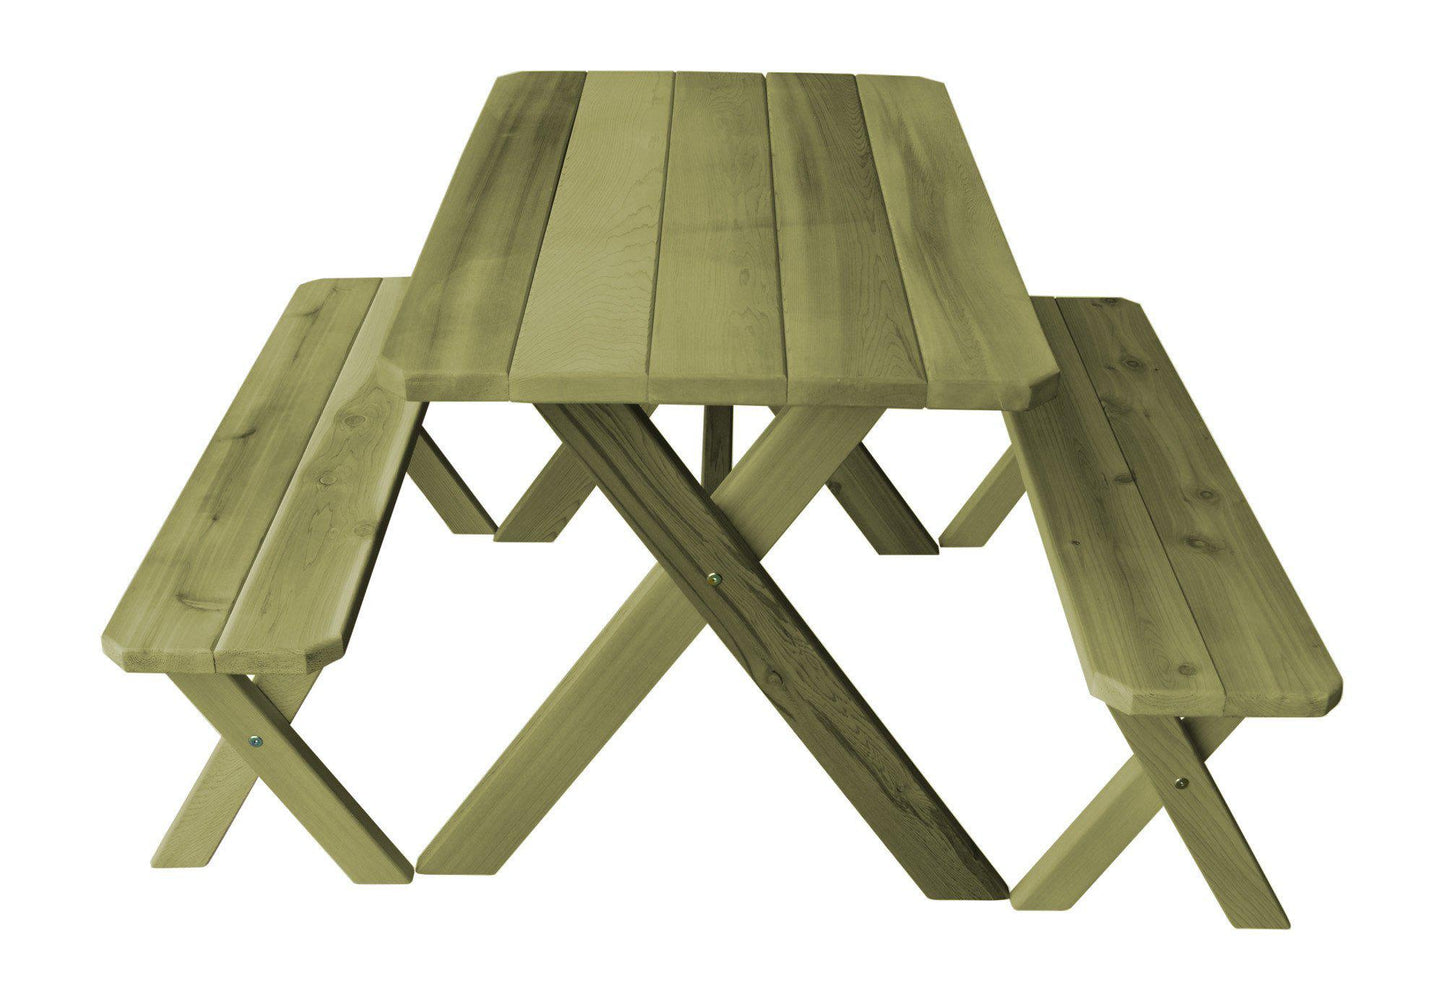 A&L FURNITURE CO. Western Red Cedar 4' Cross-leg Table w/2 Benches - Specify for FREE 2" Umbrella Hole - LEAD TIME TO SHIP 4 WEEKS OR LESS